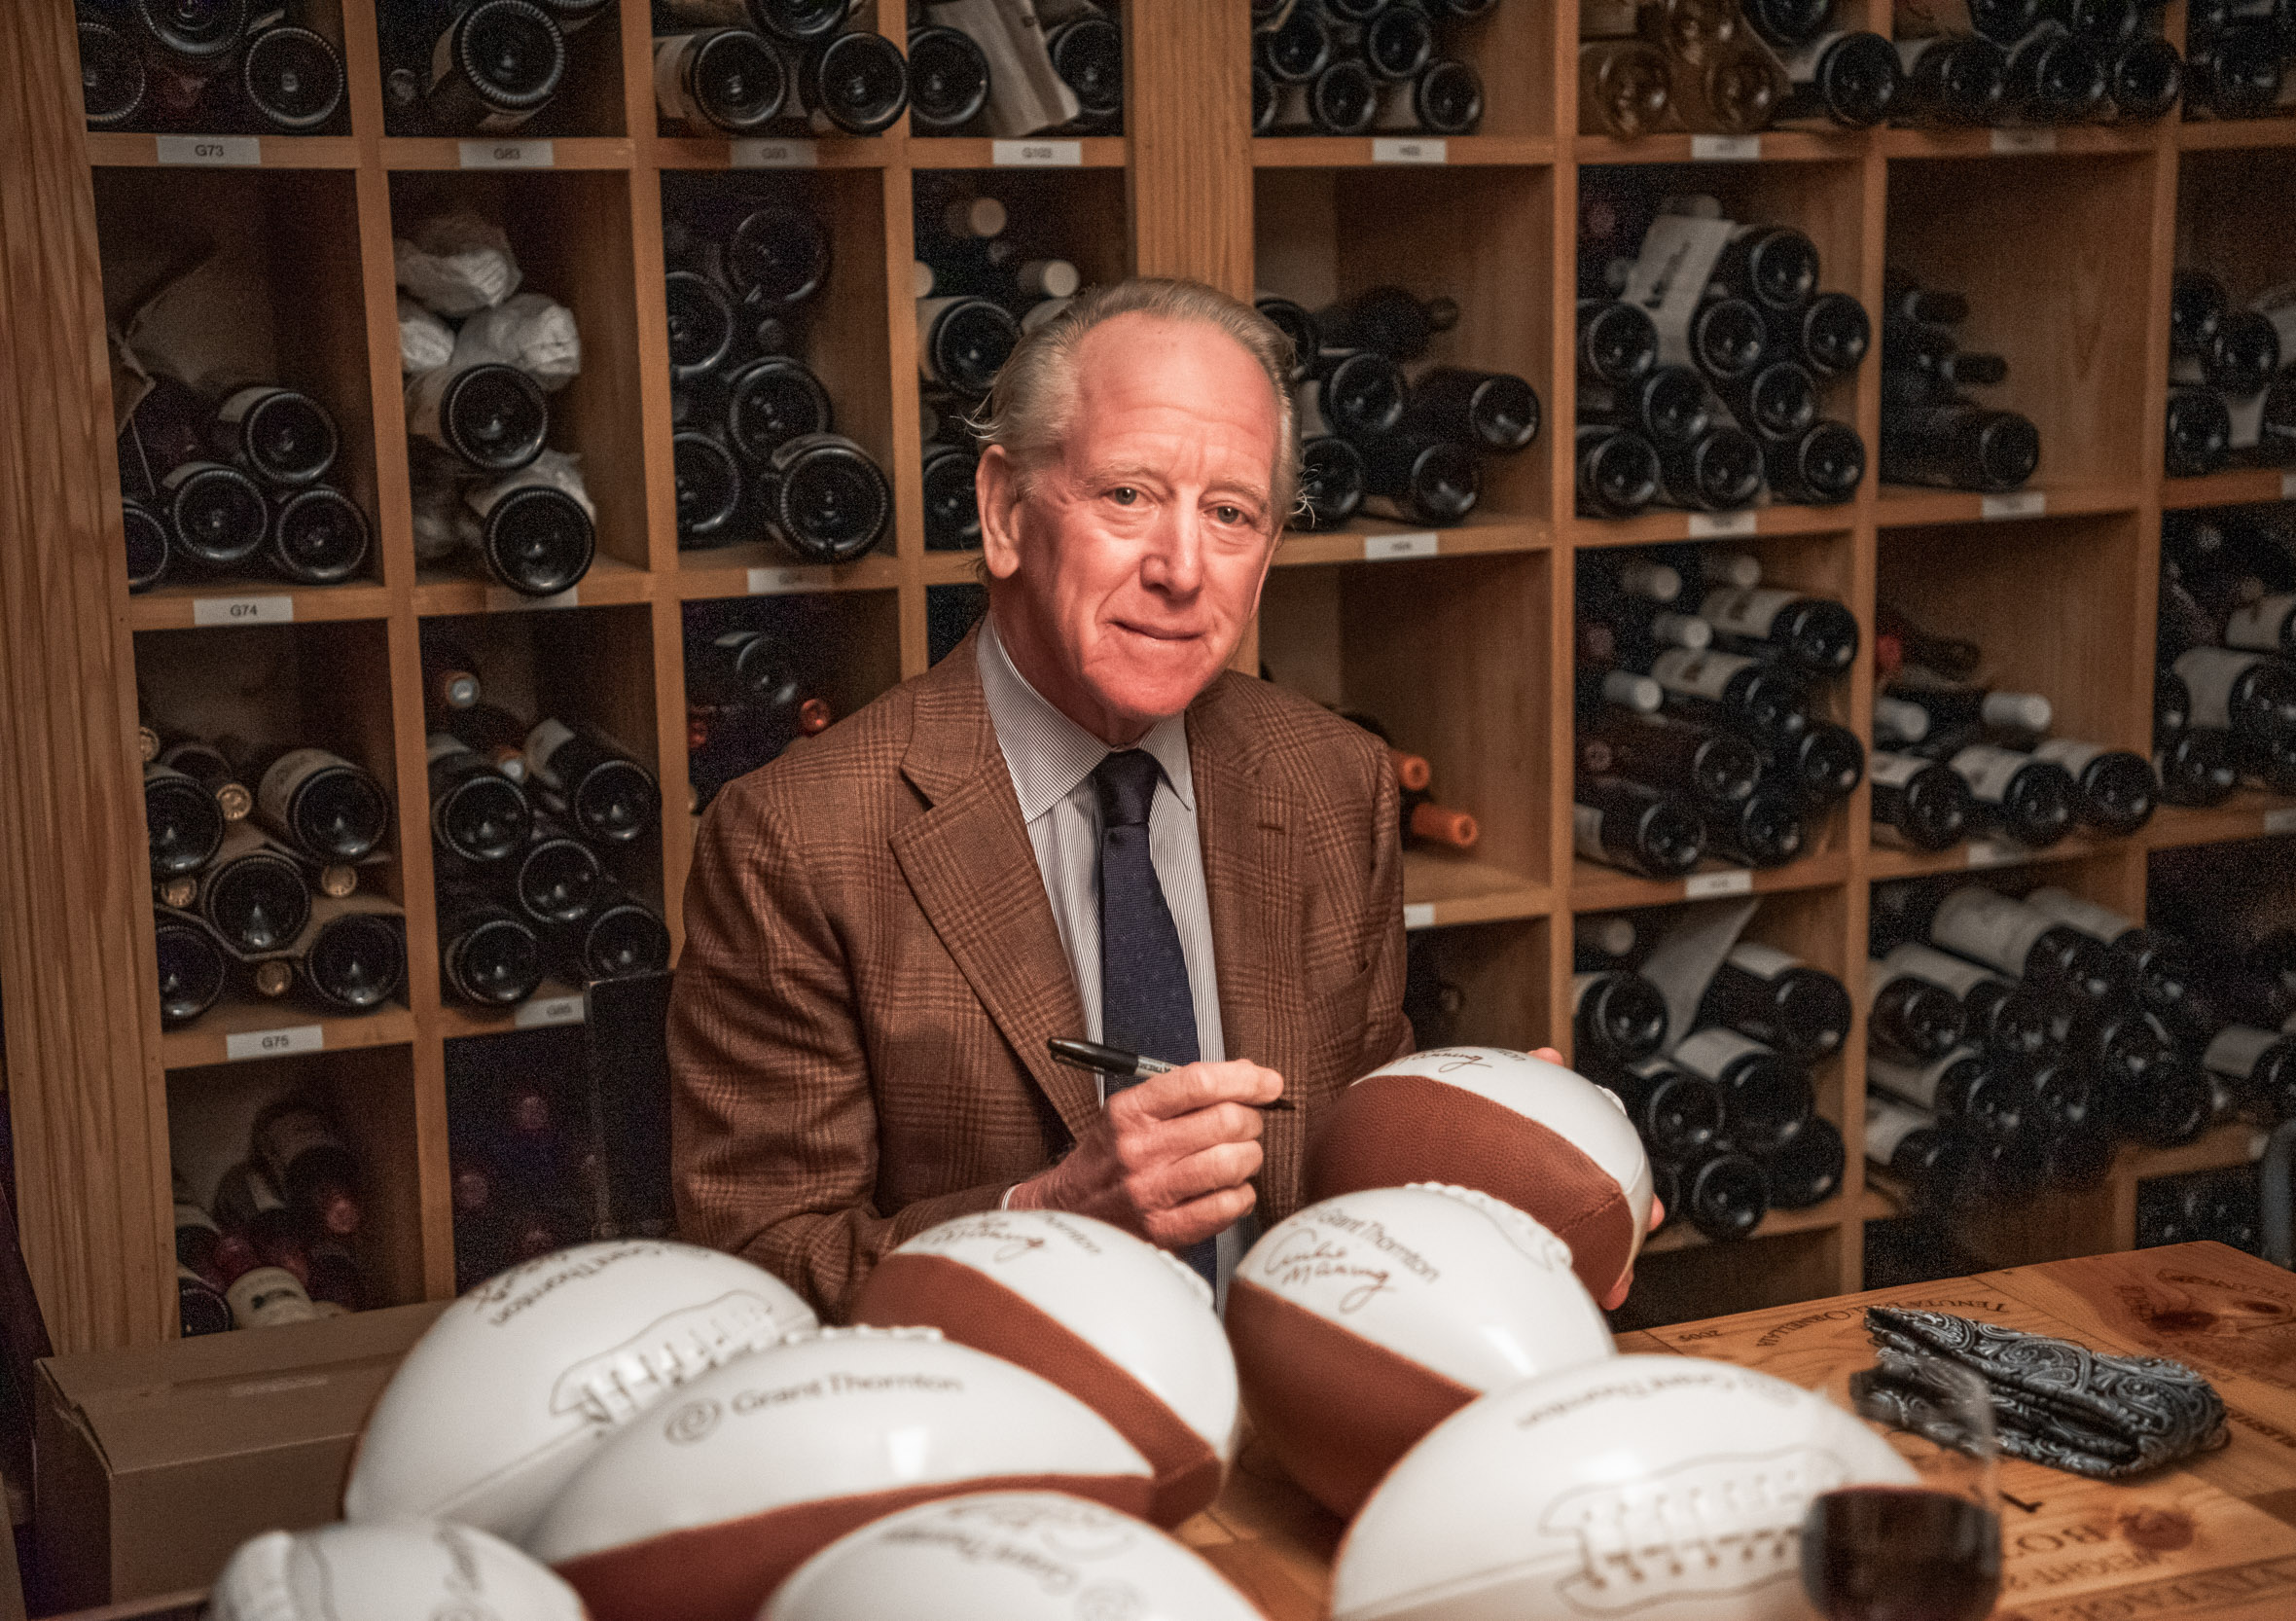 Archie Manning signing footballs at Commander’s Palace in New Orleans